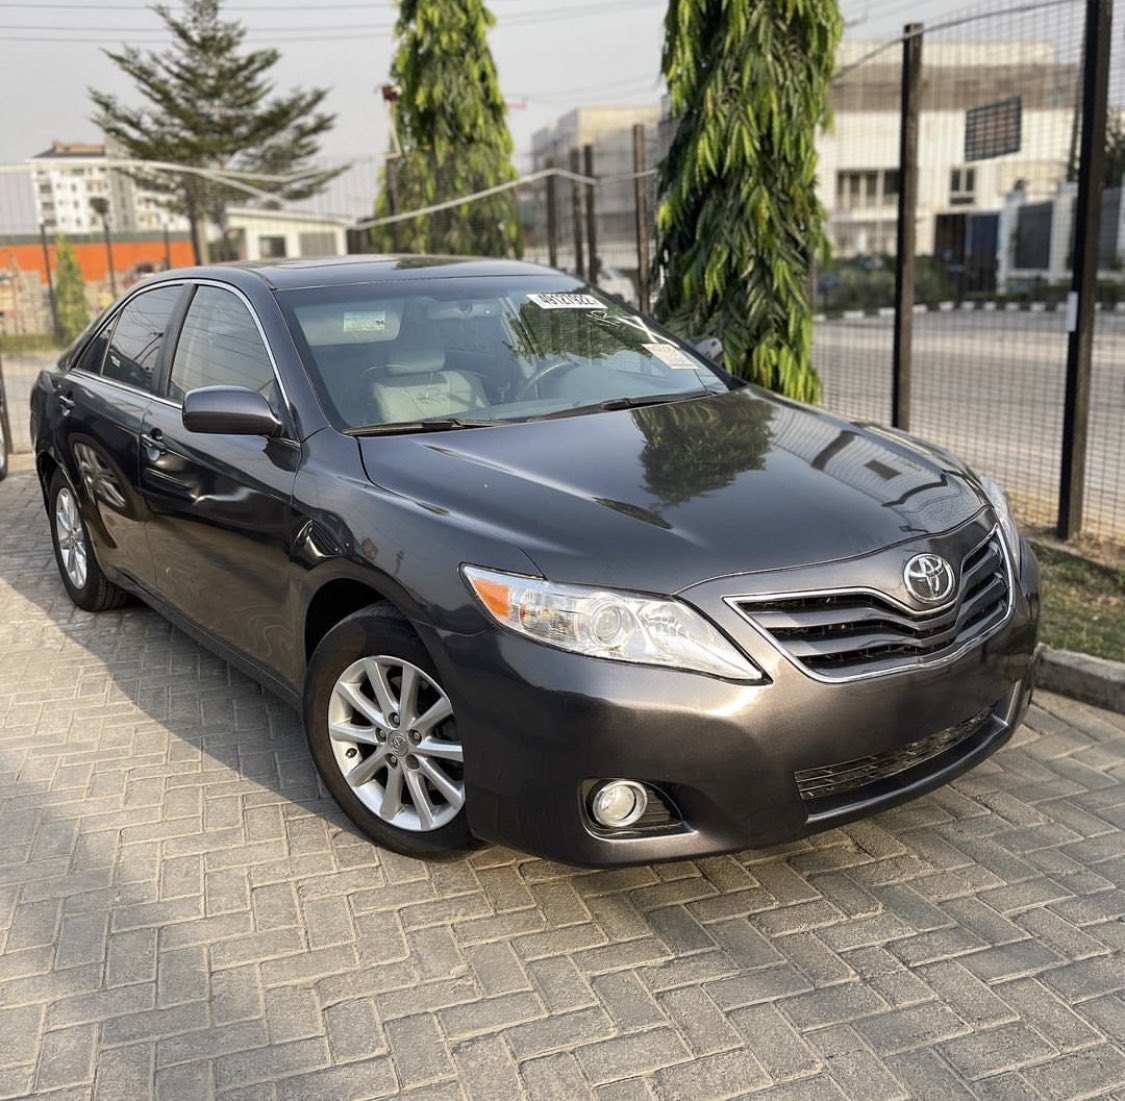 Need an affordable vehicle to go around Lagos, Abuja or Portharcourt? 
The Toyota Camry muscle is your best bet! Comes with a driver and fueling for the entire day! 
Call: 0906 639 5591 or 07033049667 to book! 

#carrentals #davido #callanita #Anita